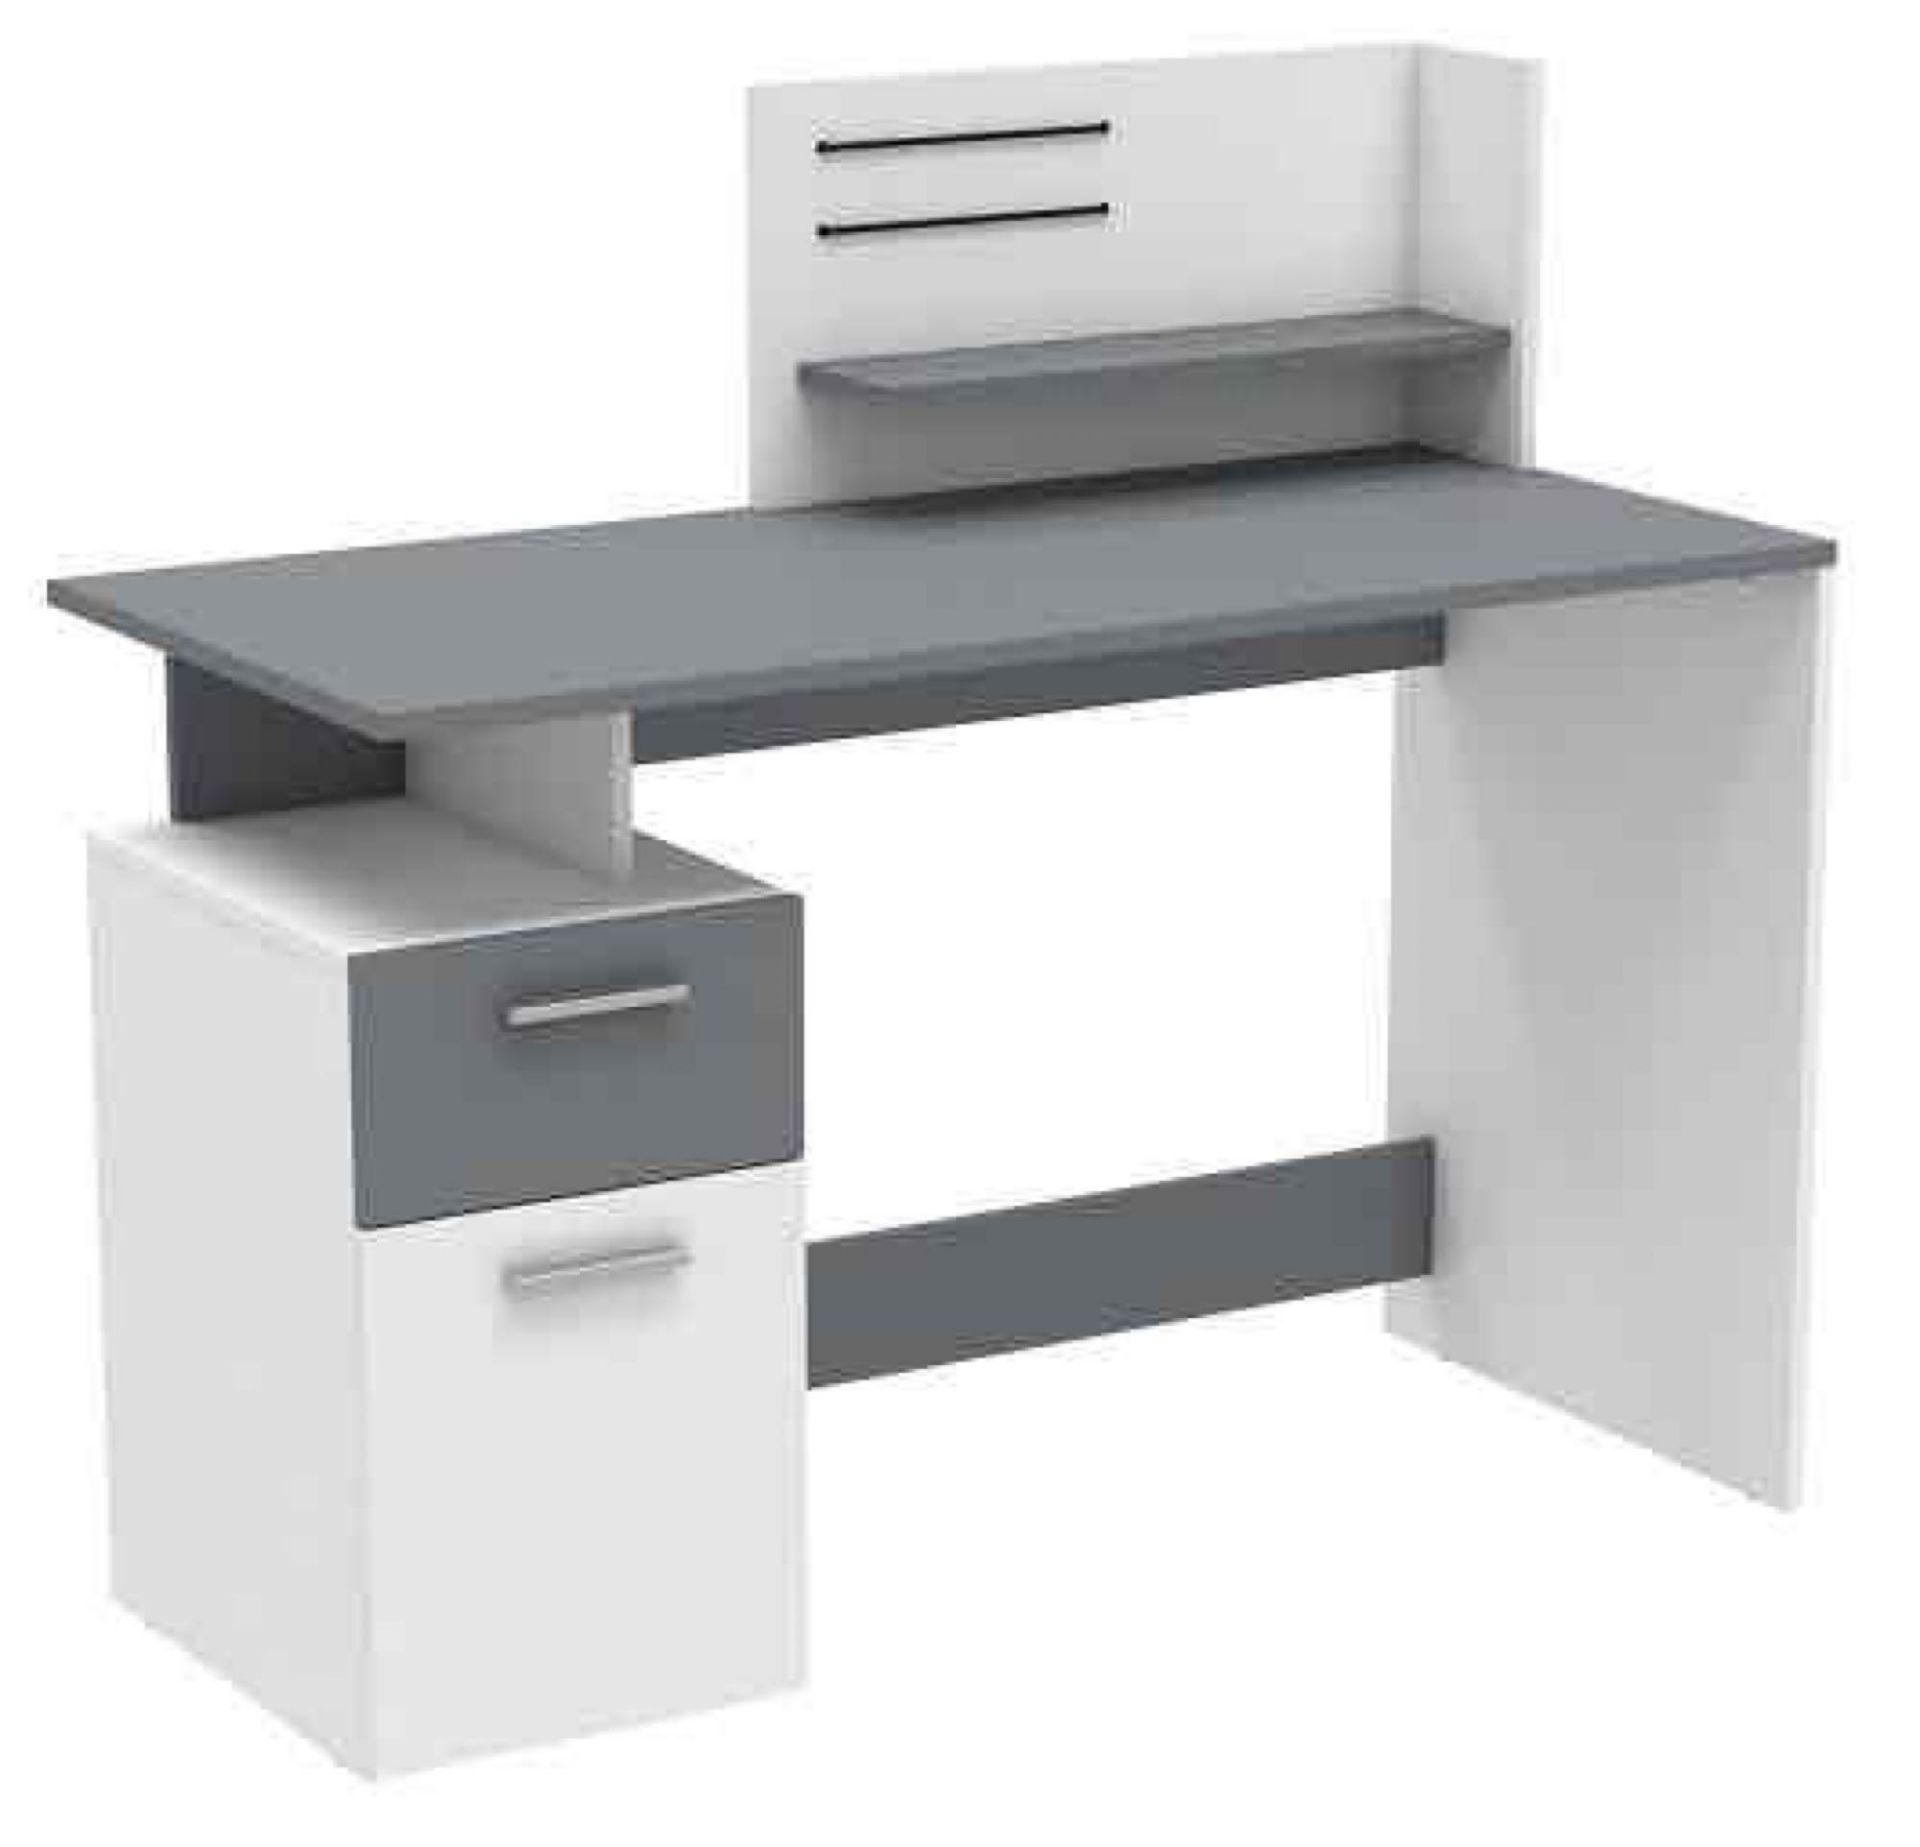 (Db) RRP £170 Lot To Contain One Boxed Willey Wooden Computer Desk In White And Graphite Grey. Heigh